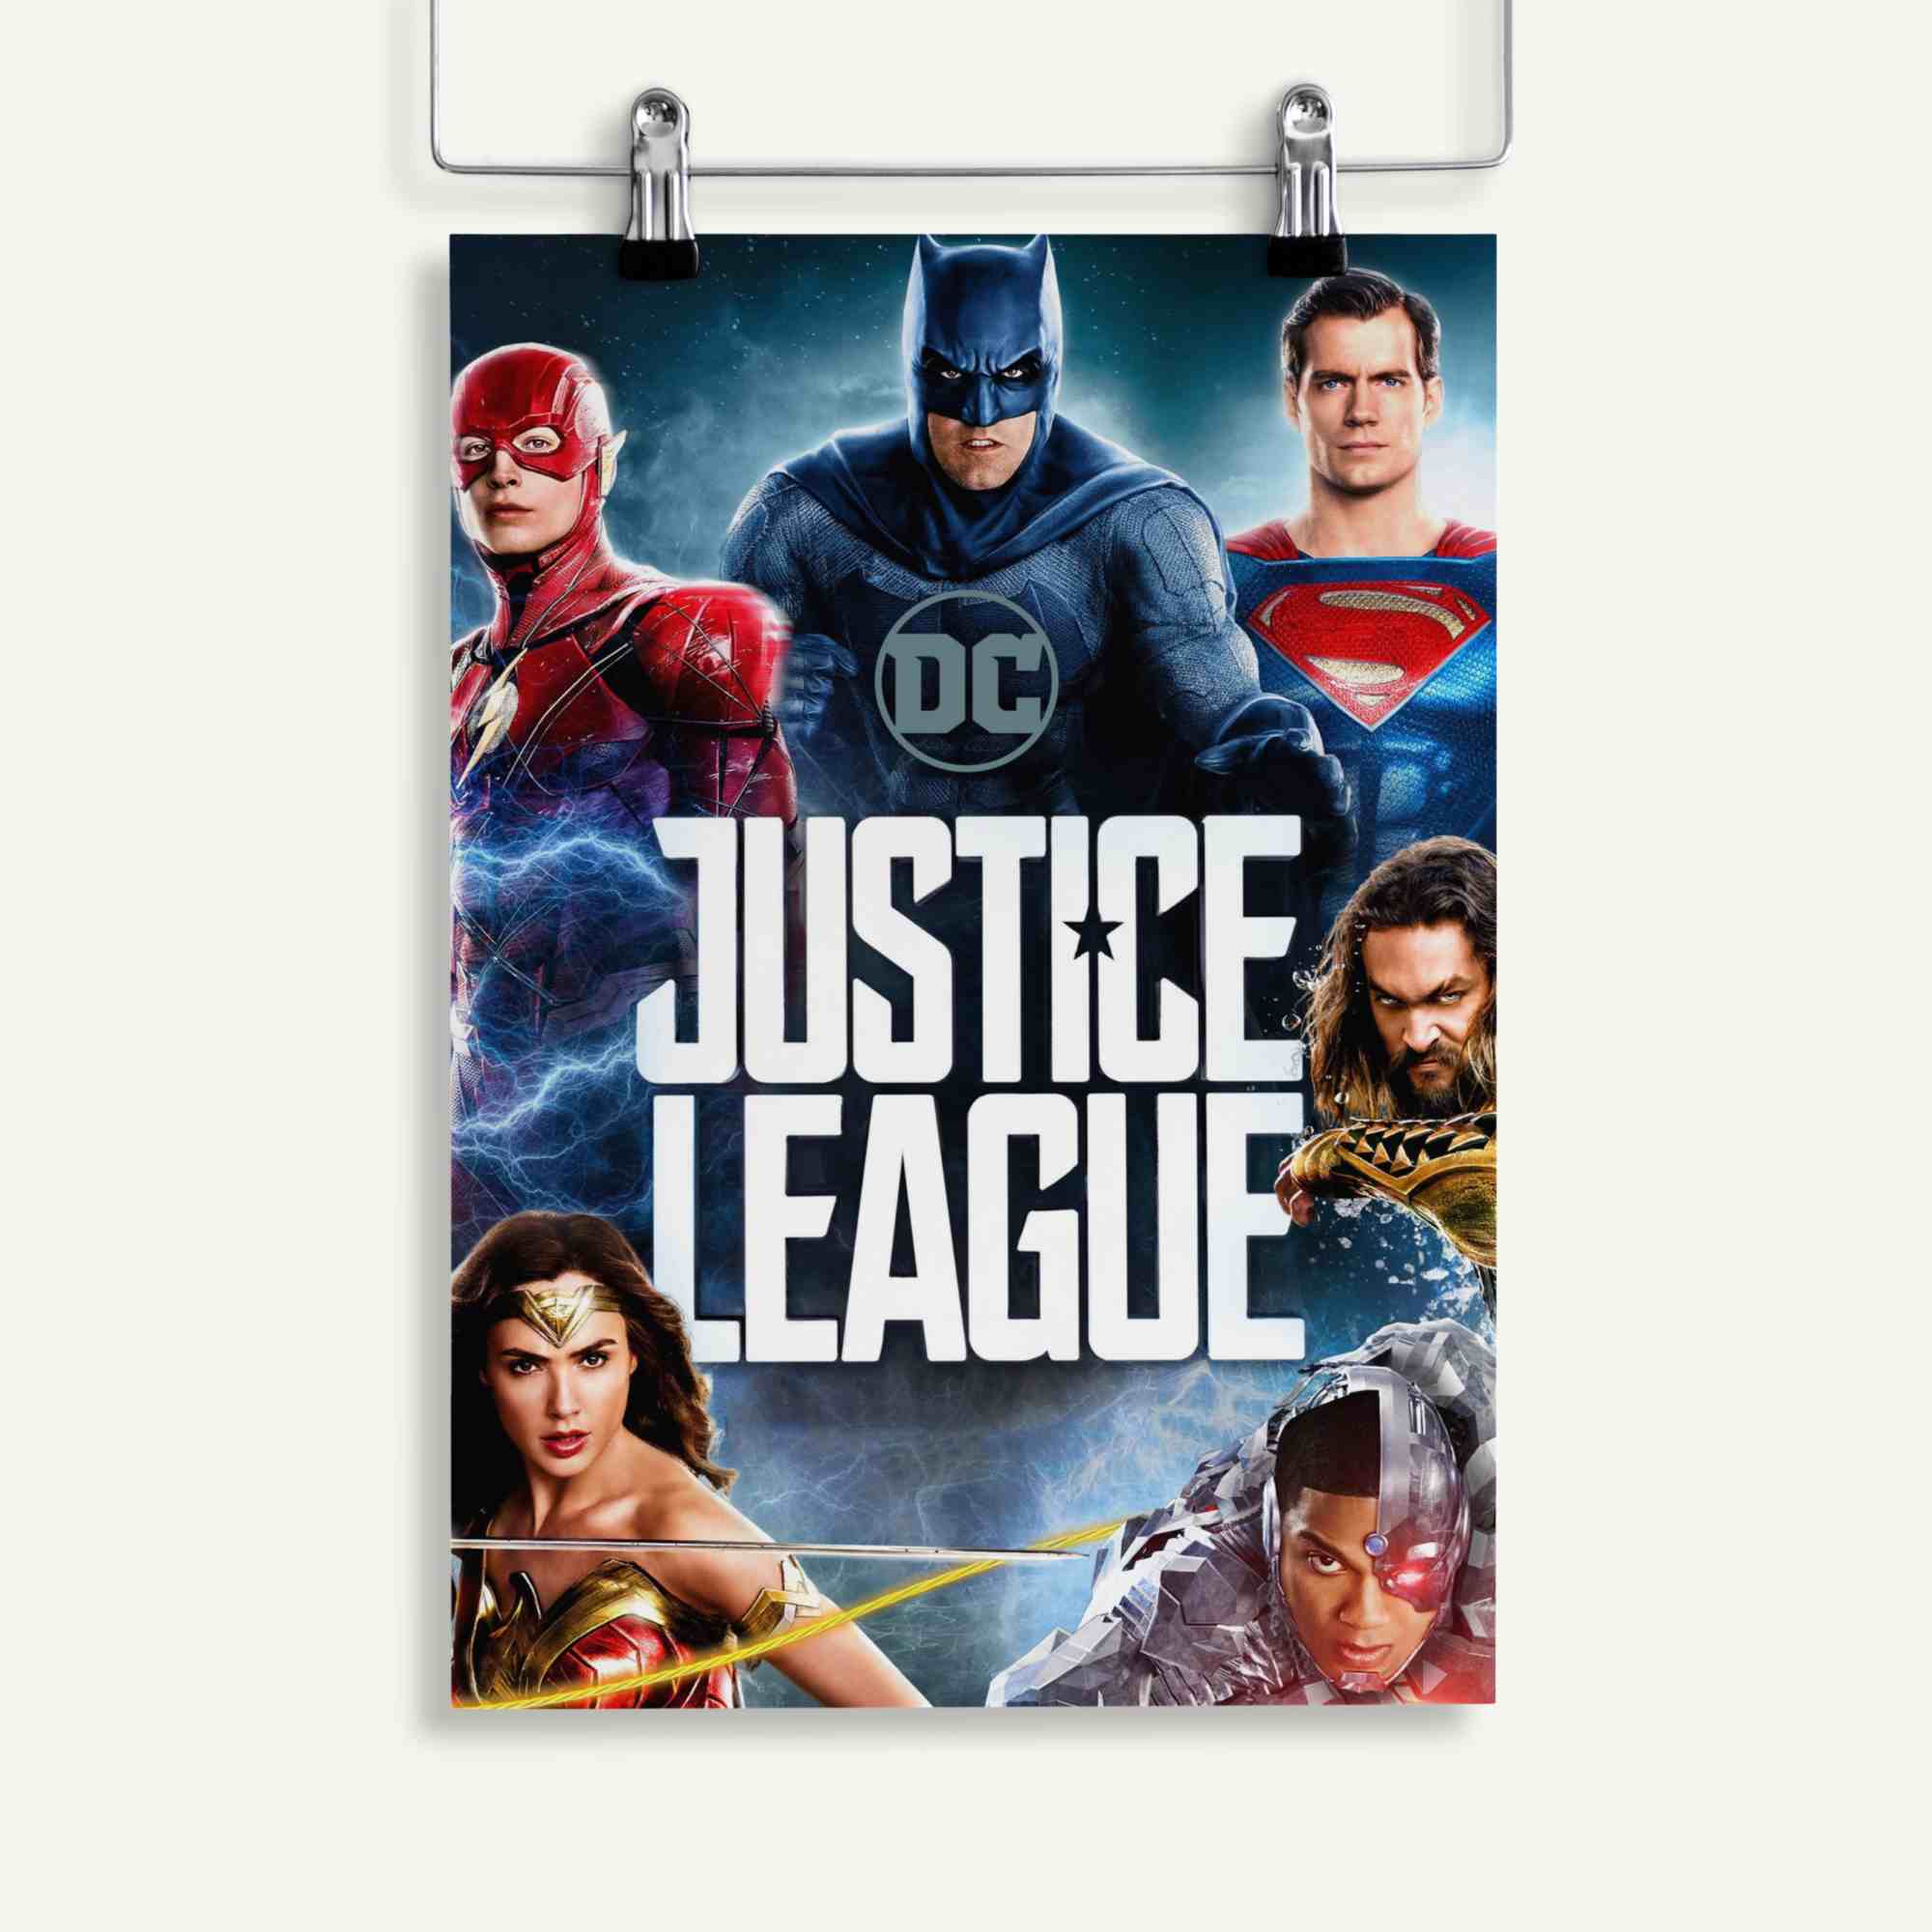 Justice league movie poster